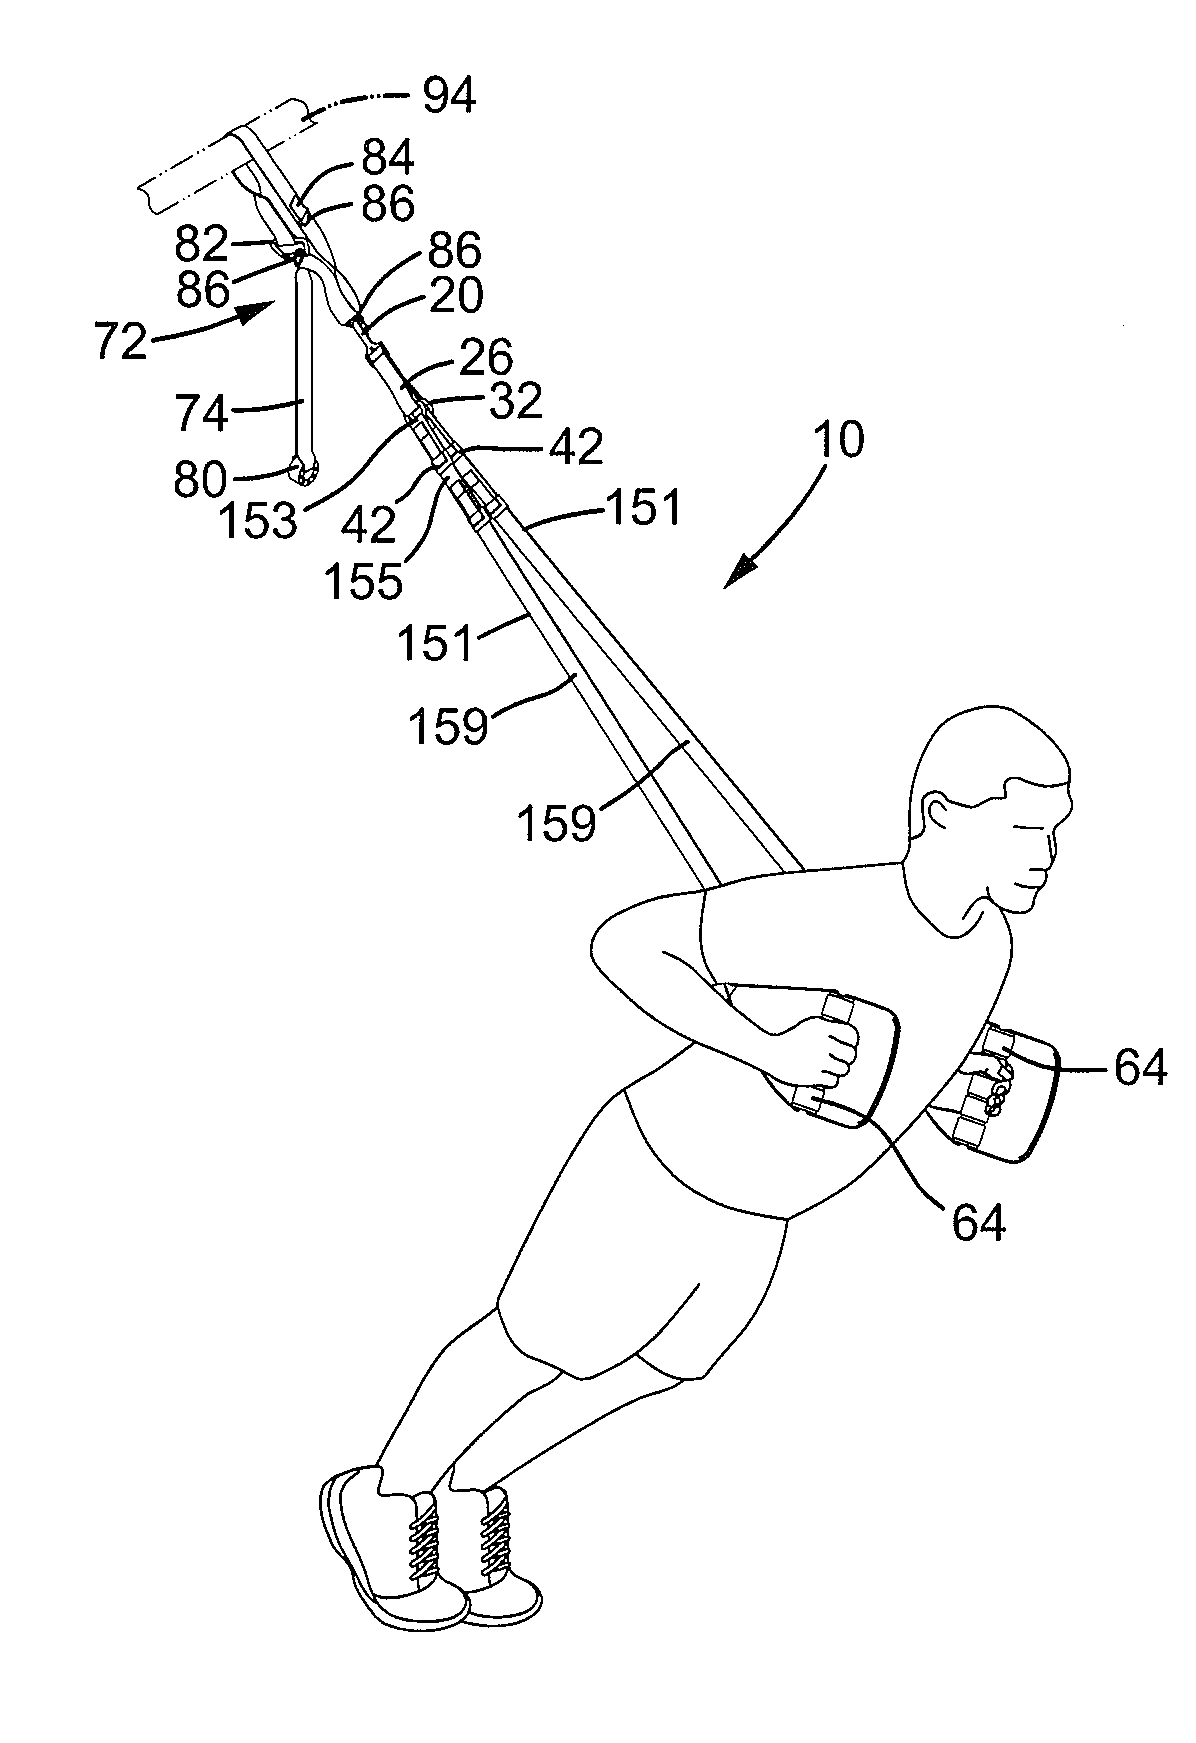 Exerciser with Easy-to-Adjust Inelastic Straps